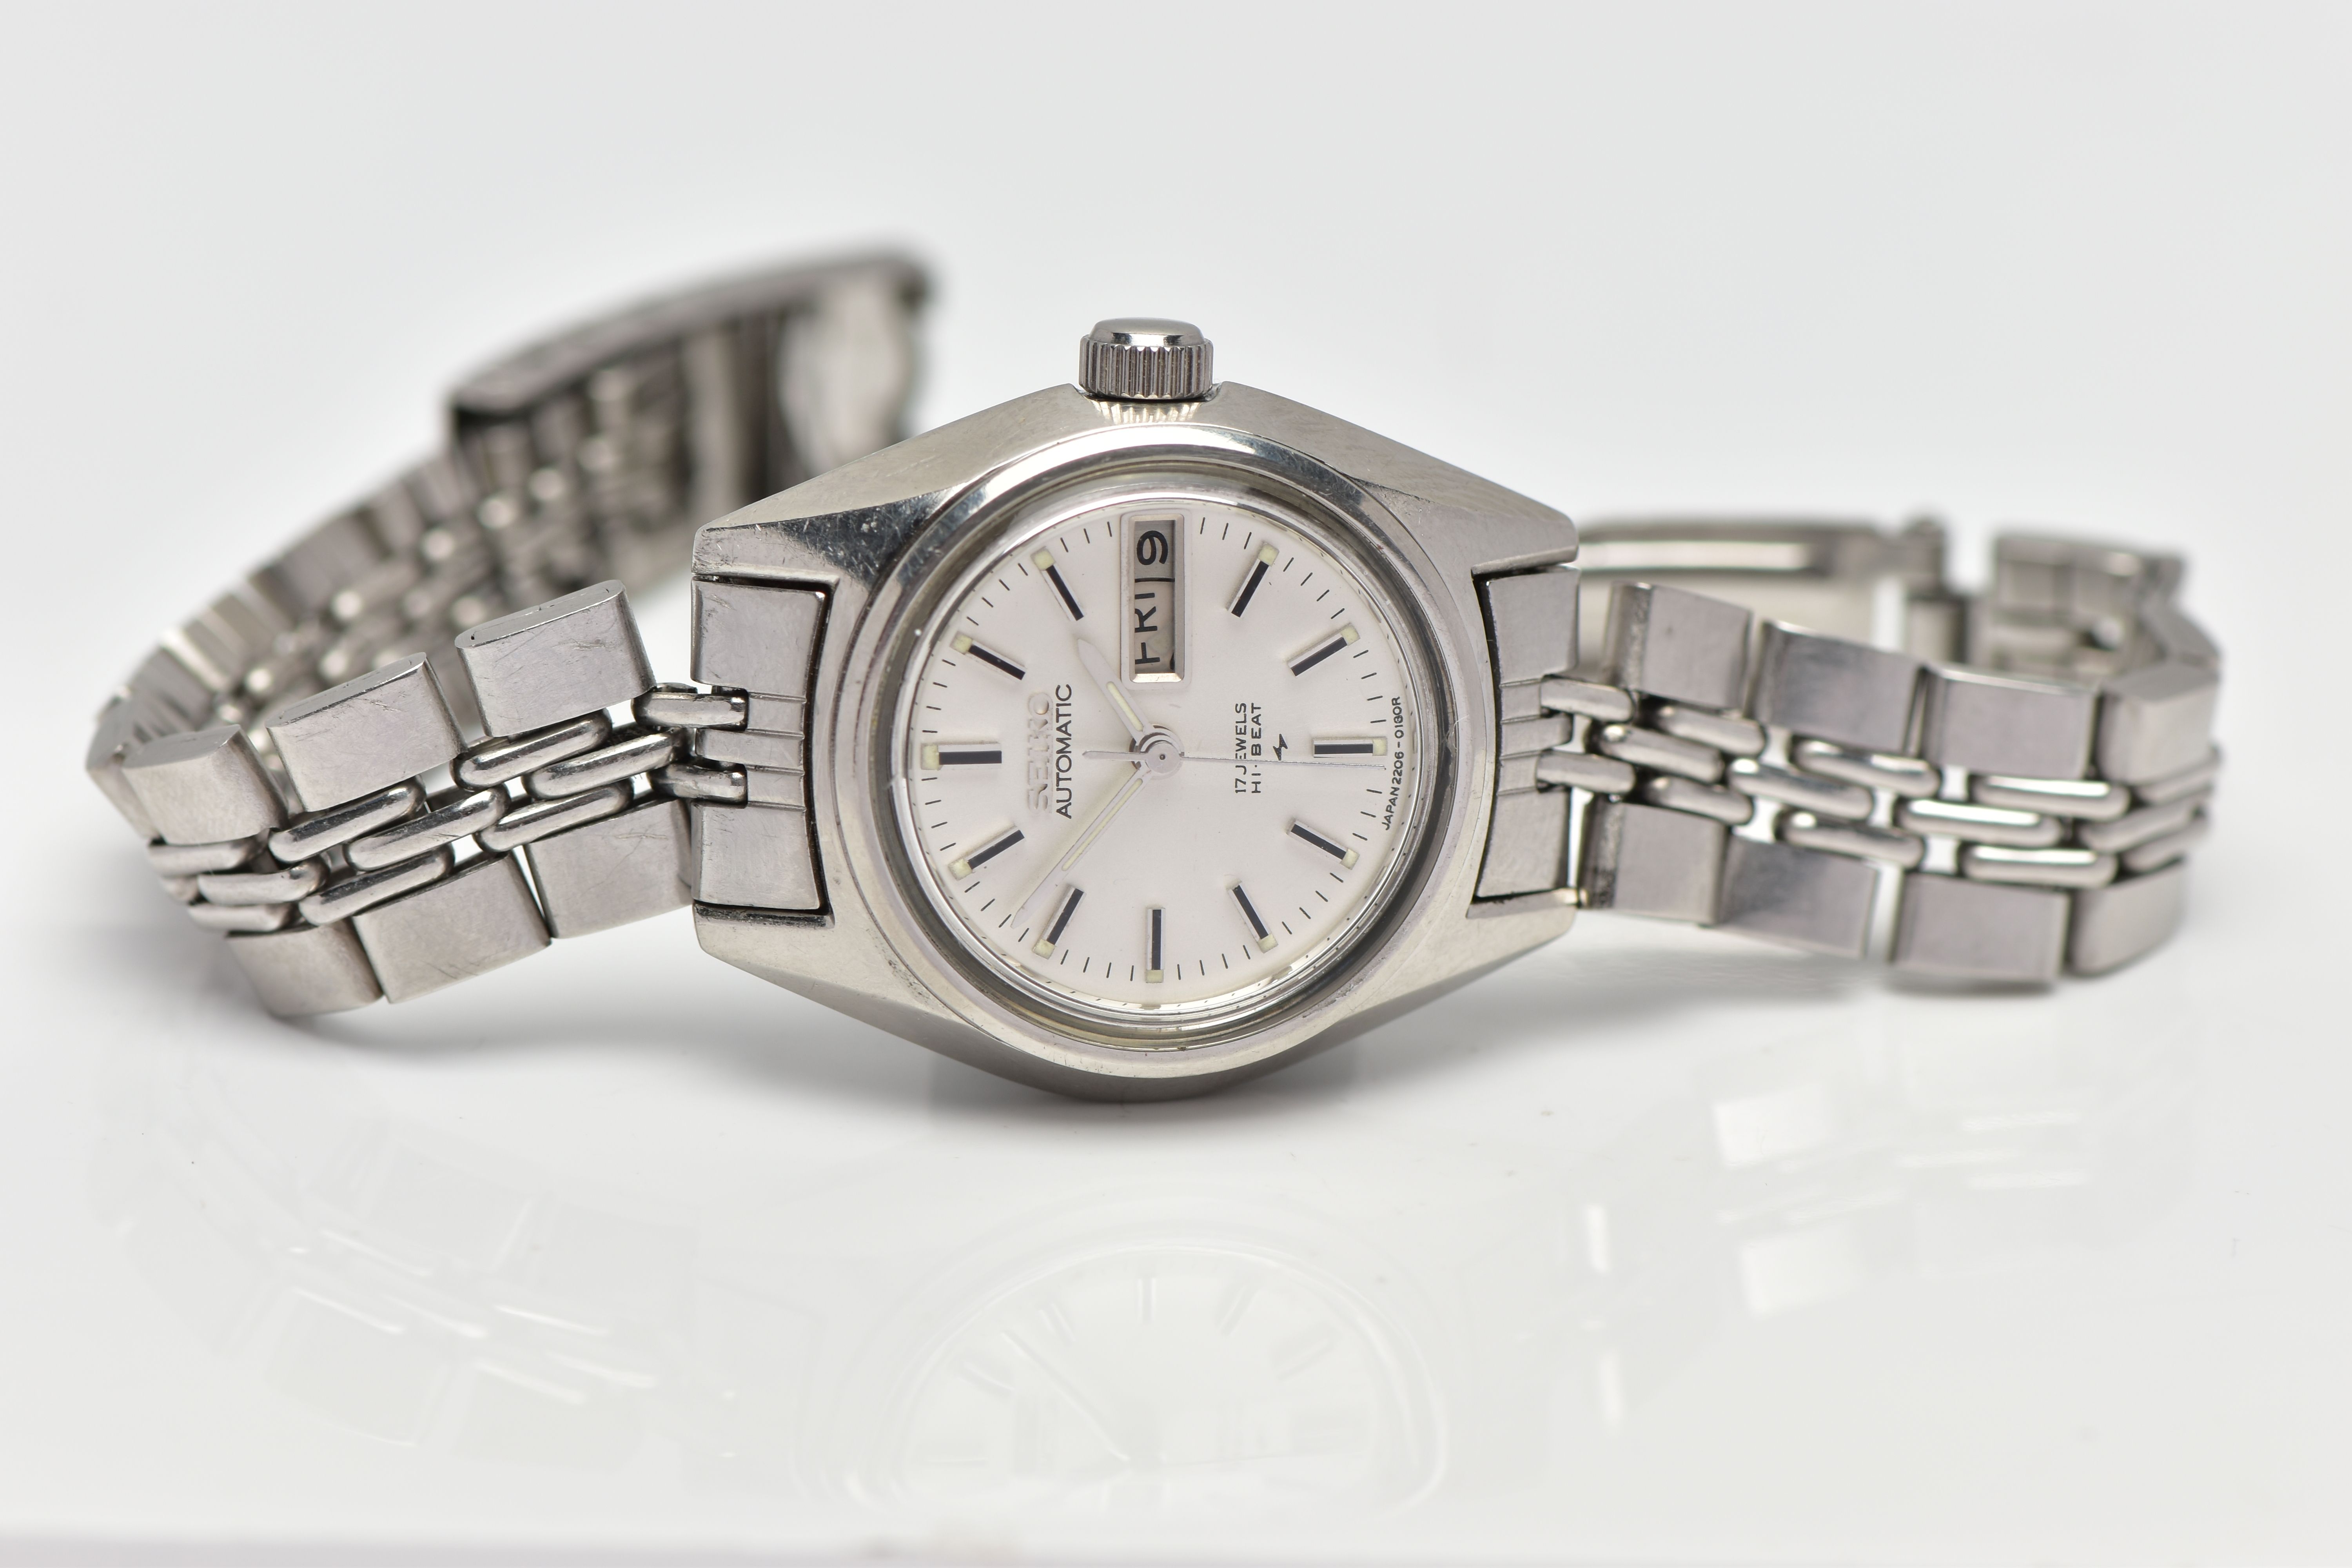 A LADIES 'SEIKO AUTOMATIC' WRISTWATCH, round silver dial signed 'Seiko automatic', day/date window - Image 4 of 6